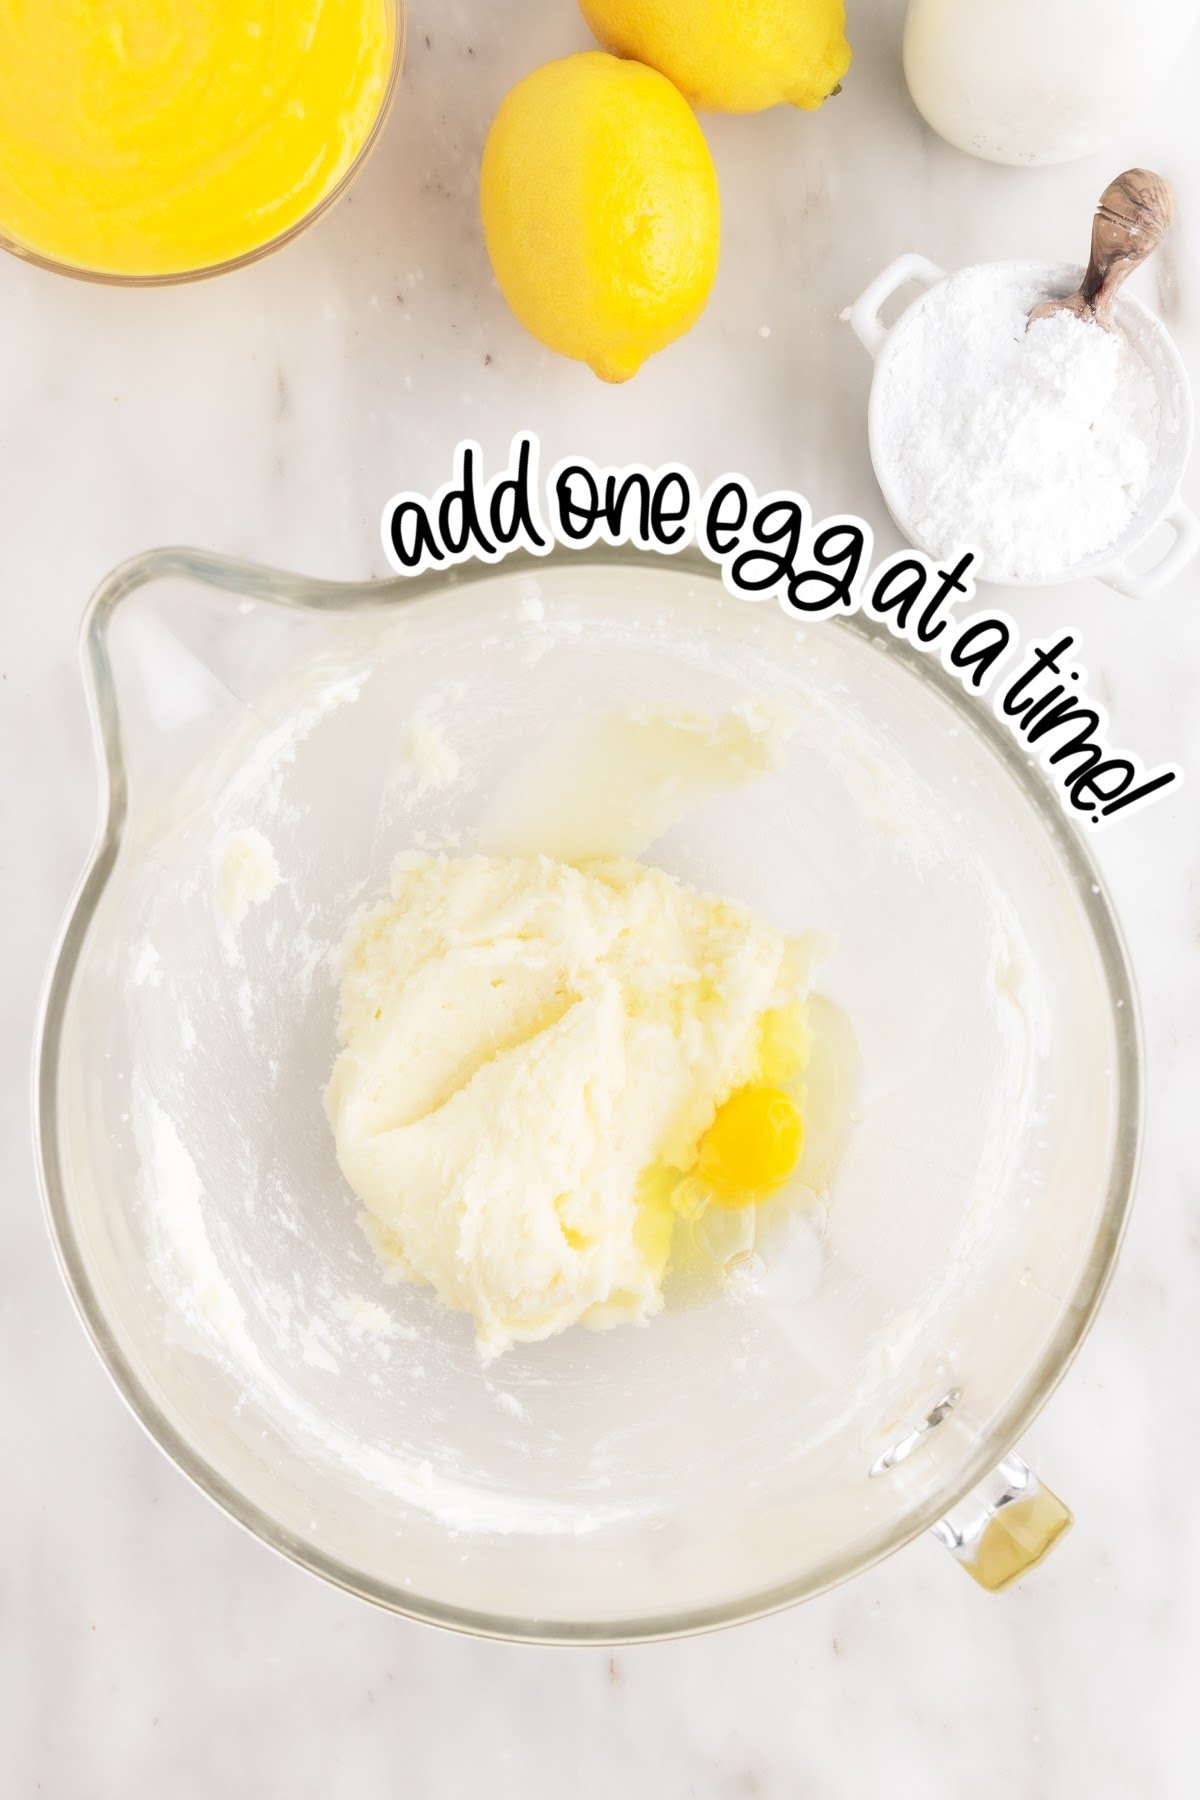 Eggs added to the sugar mixture with text overlay.